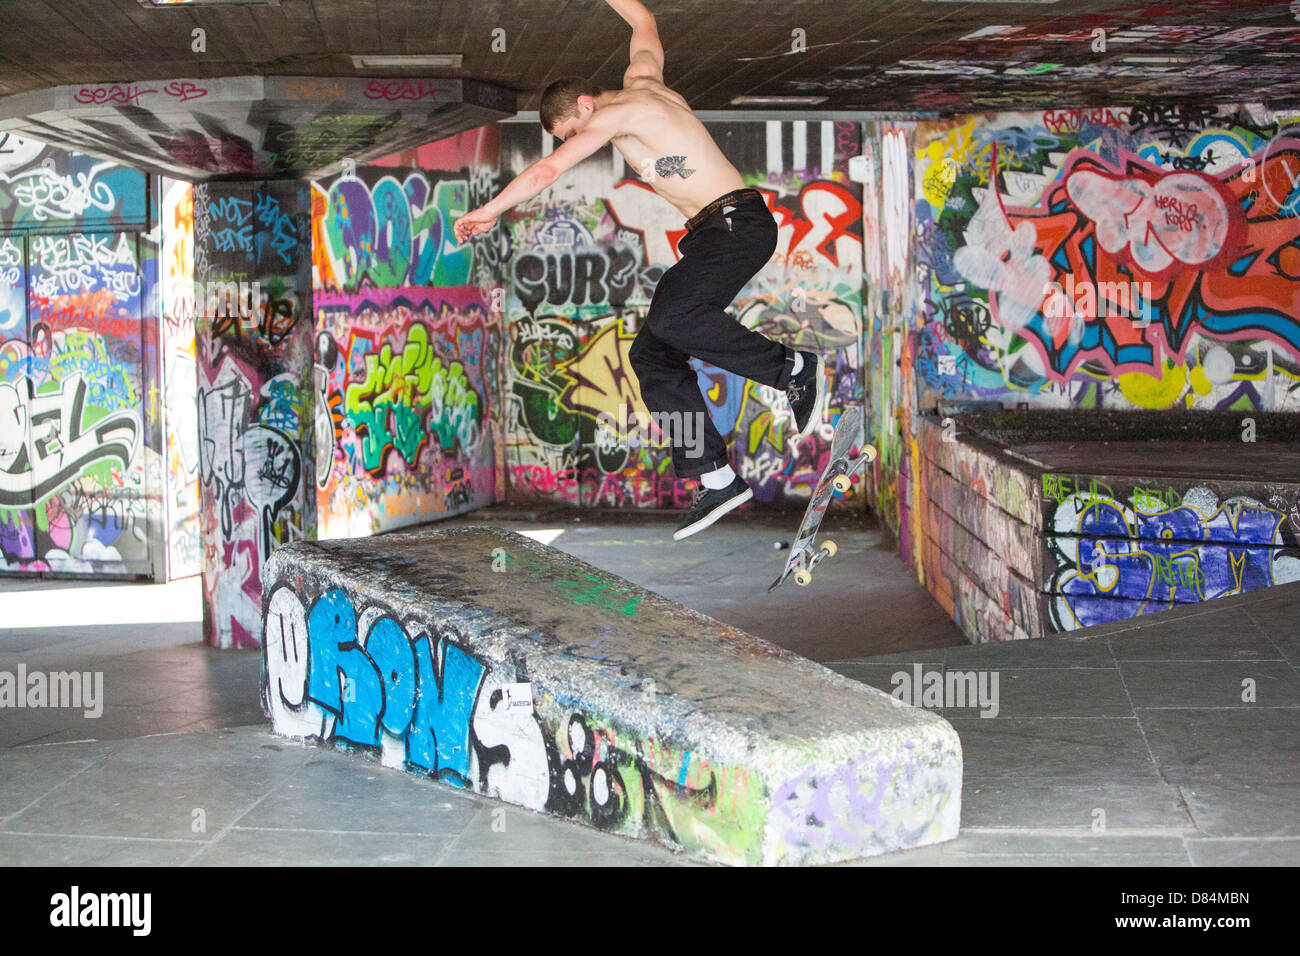 Skateboarders leaping obstacles on London's south Bank. Stock Photo